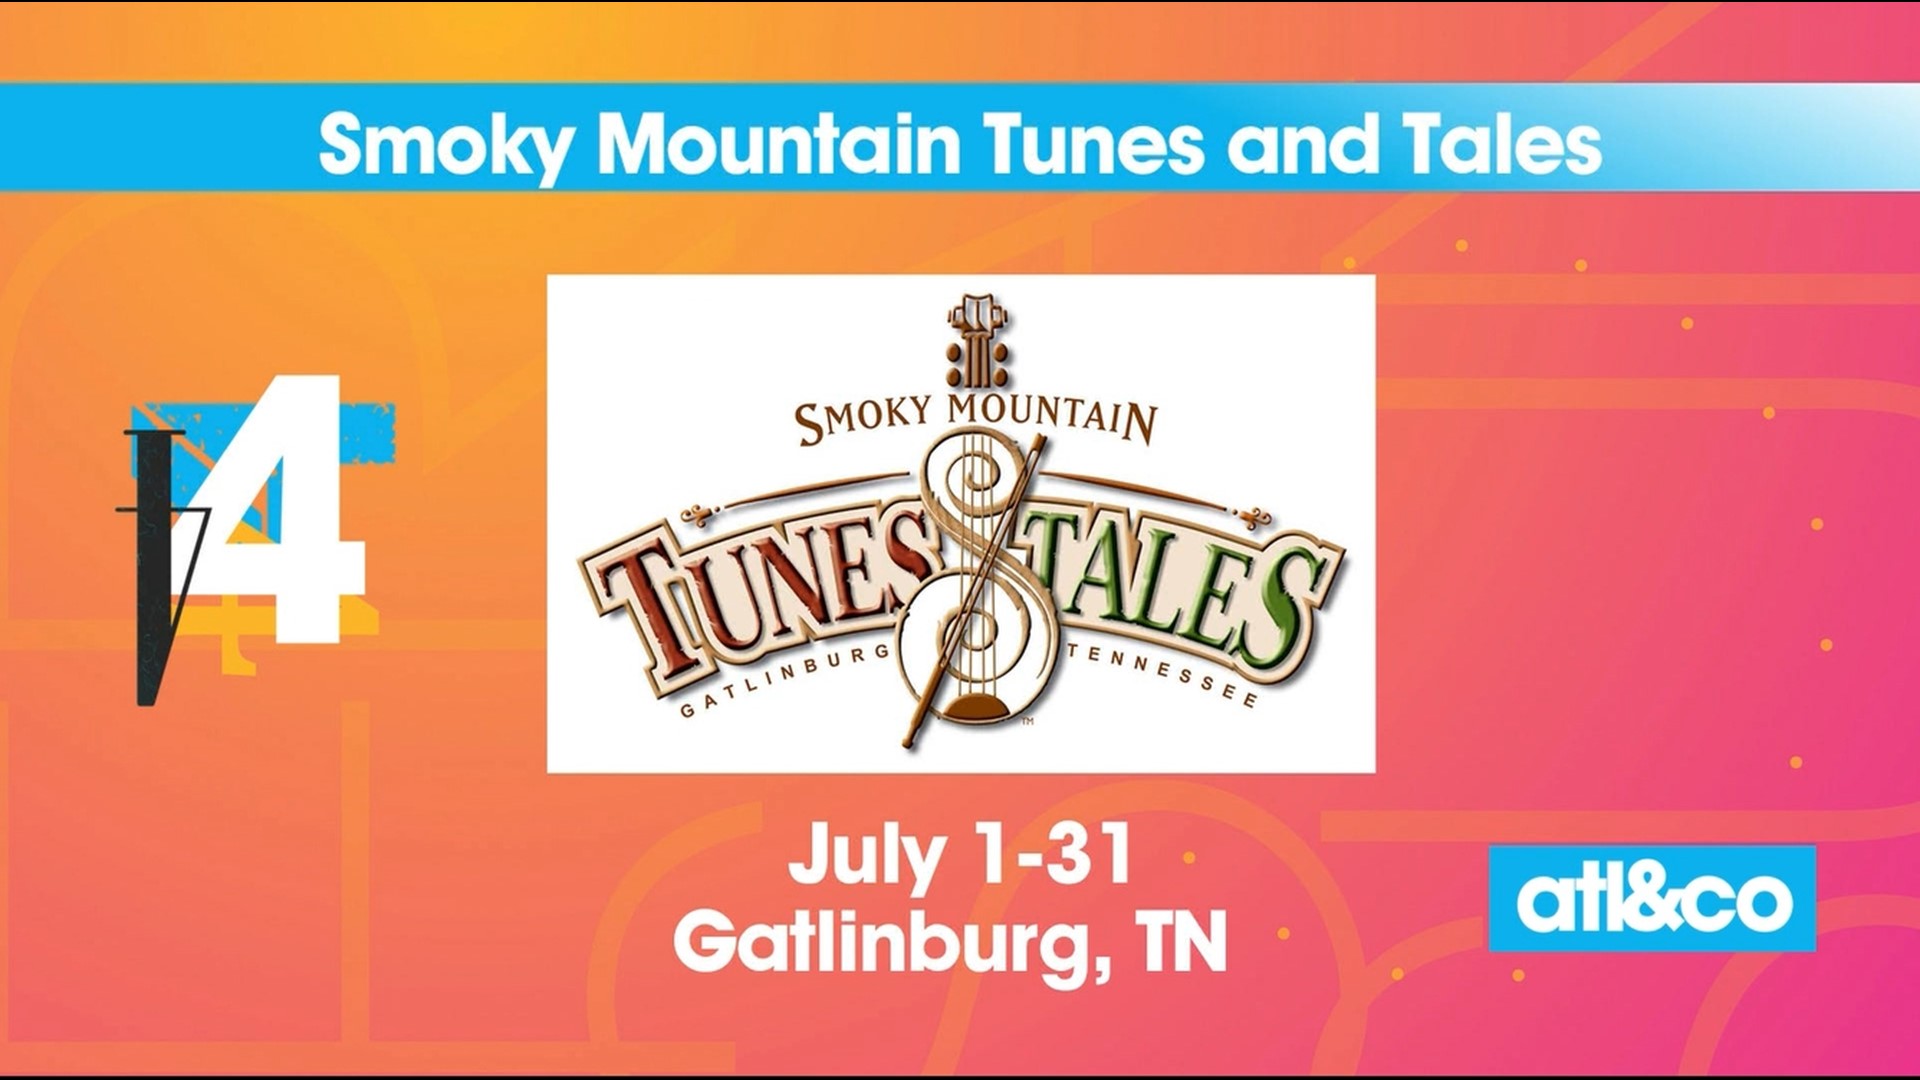 Find top weekend events, including Smoky Mountain Tunes and Tales, in 4 The Weekend, sponsored by Gatlinburg, TN.